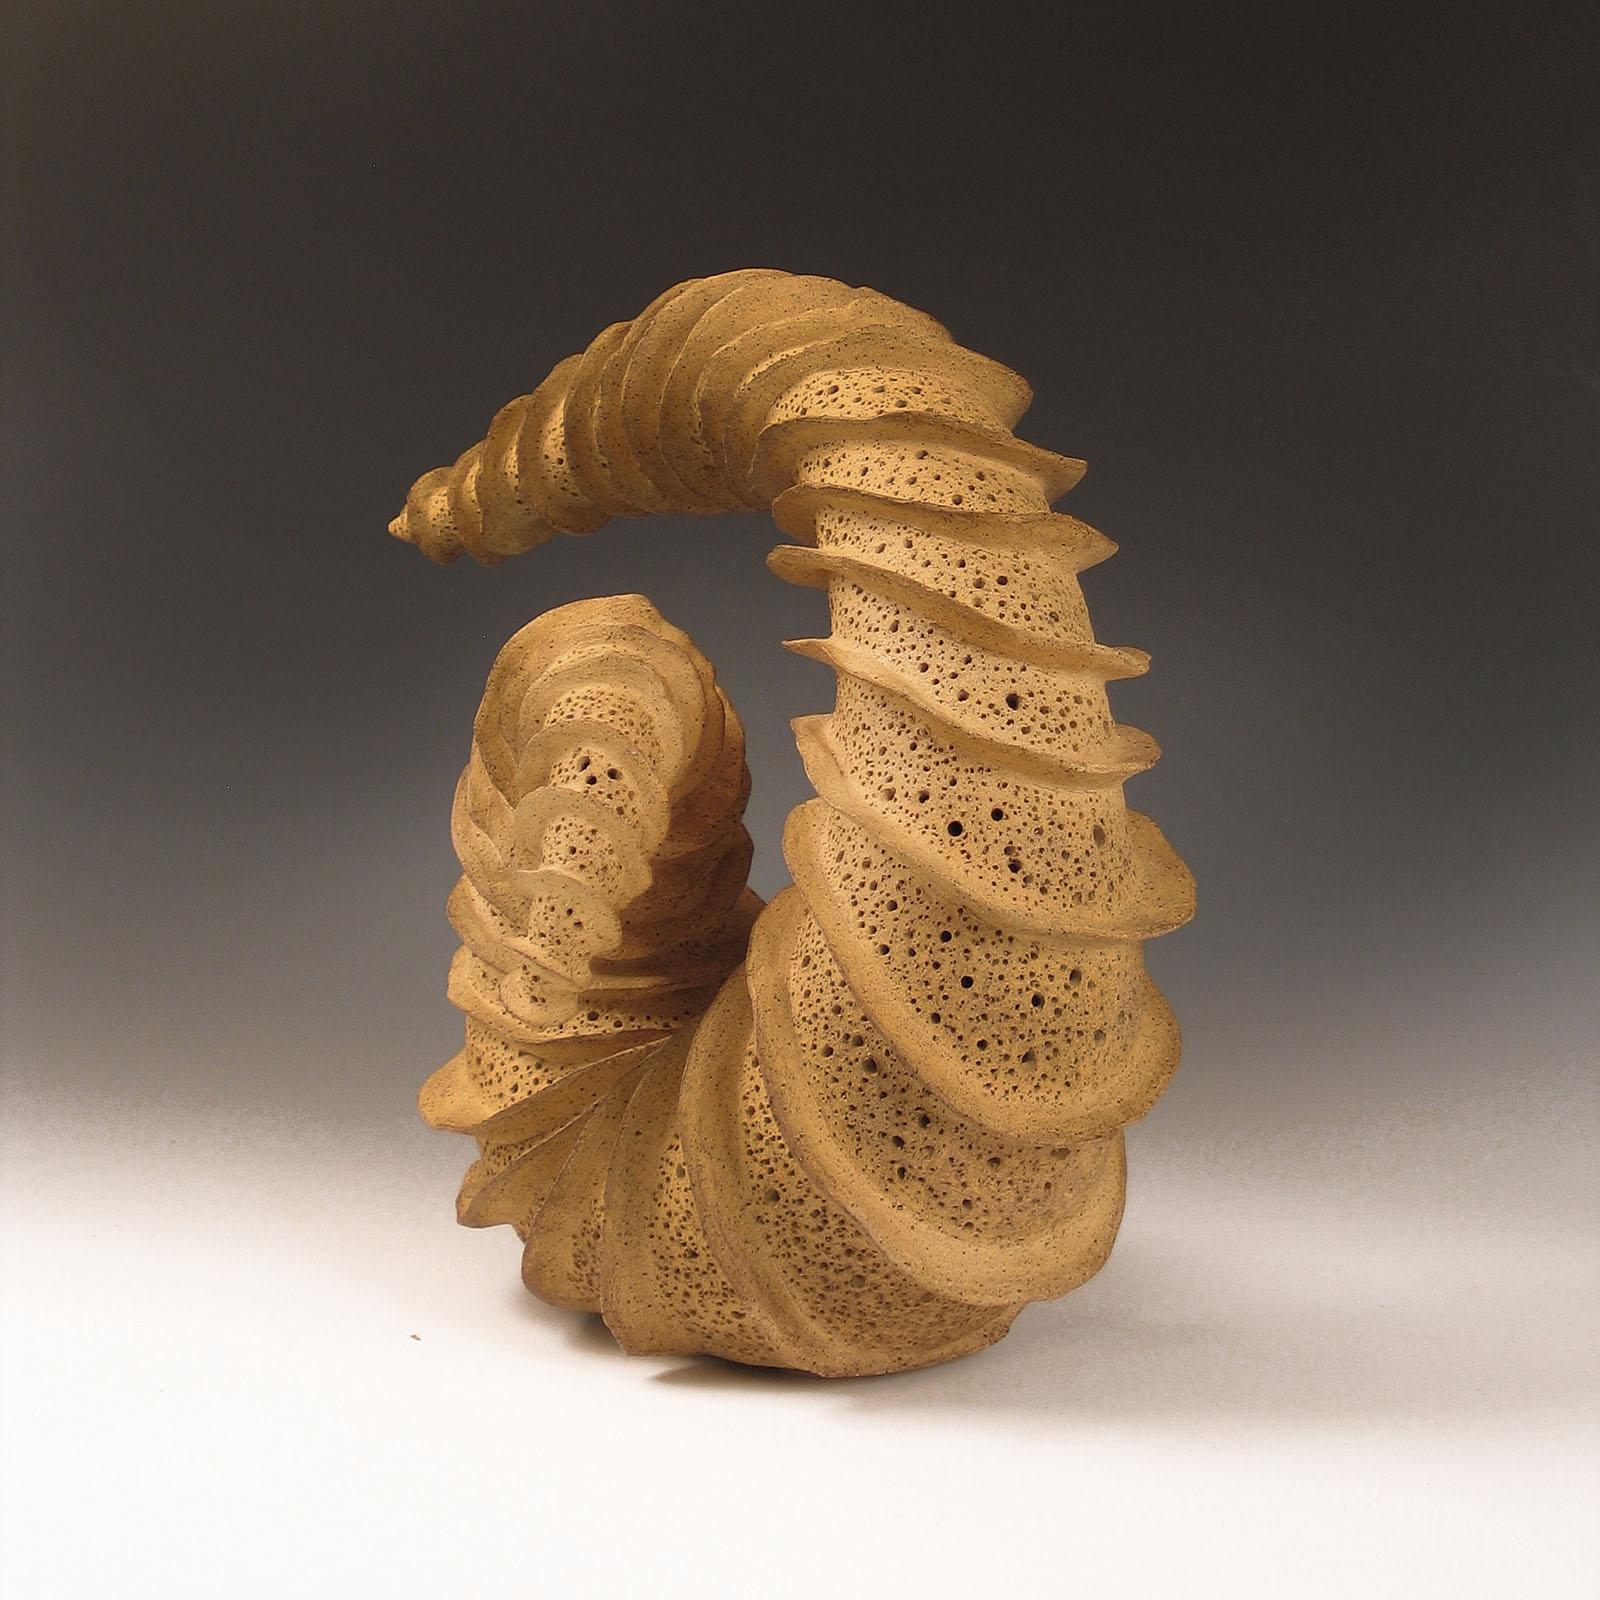  “Looking Back”,  radiates fins spiraling around a tapering coiled ceramic form - Black Abstract Sculpture by Elaine Lorenz